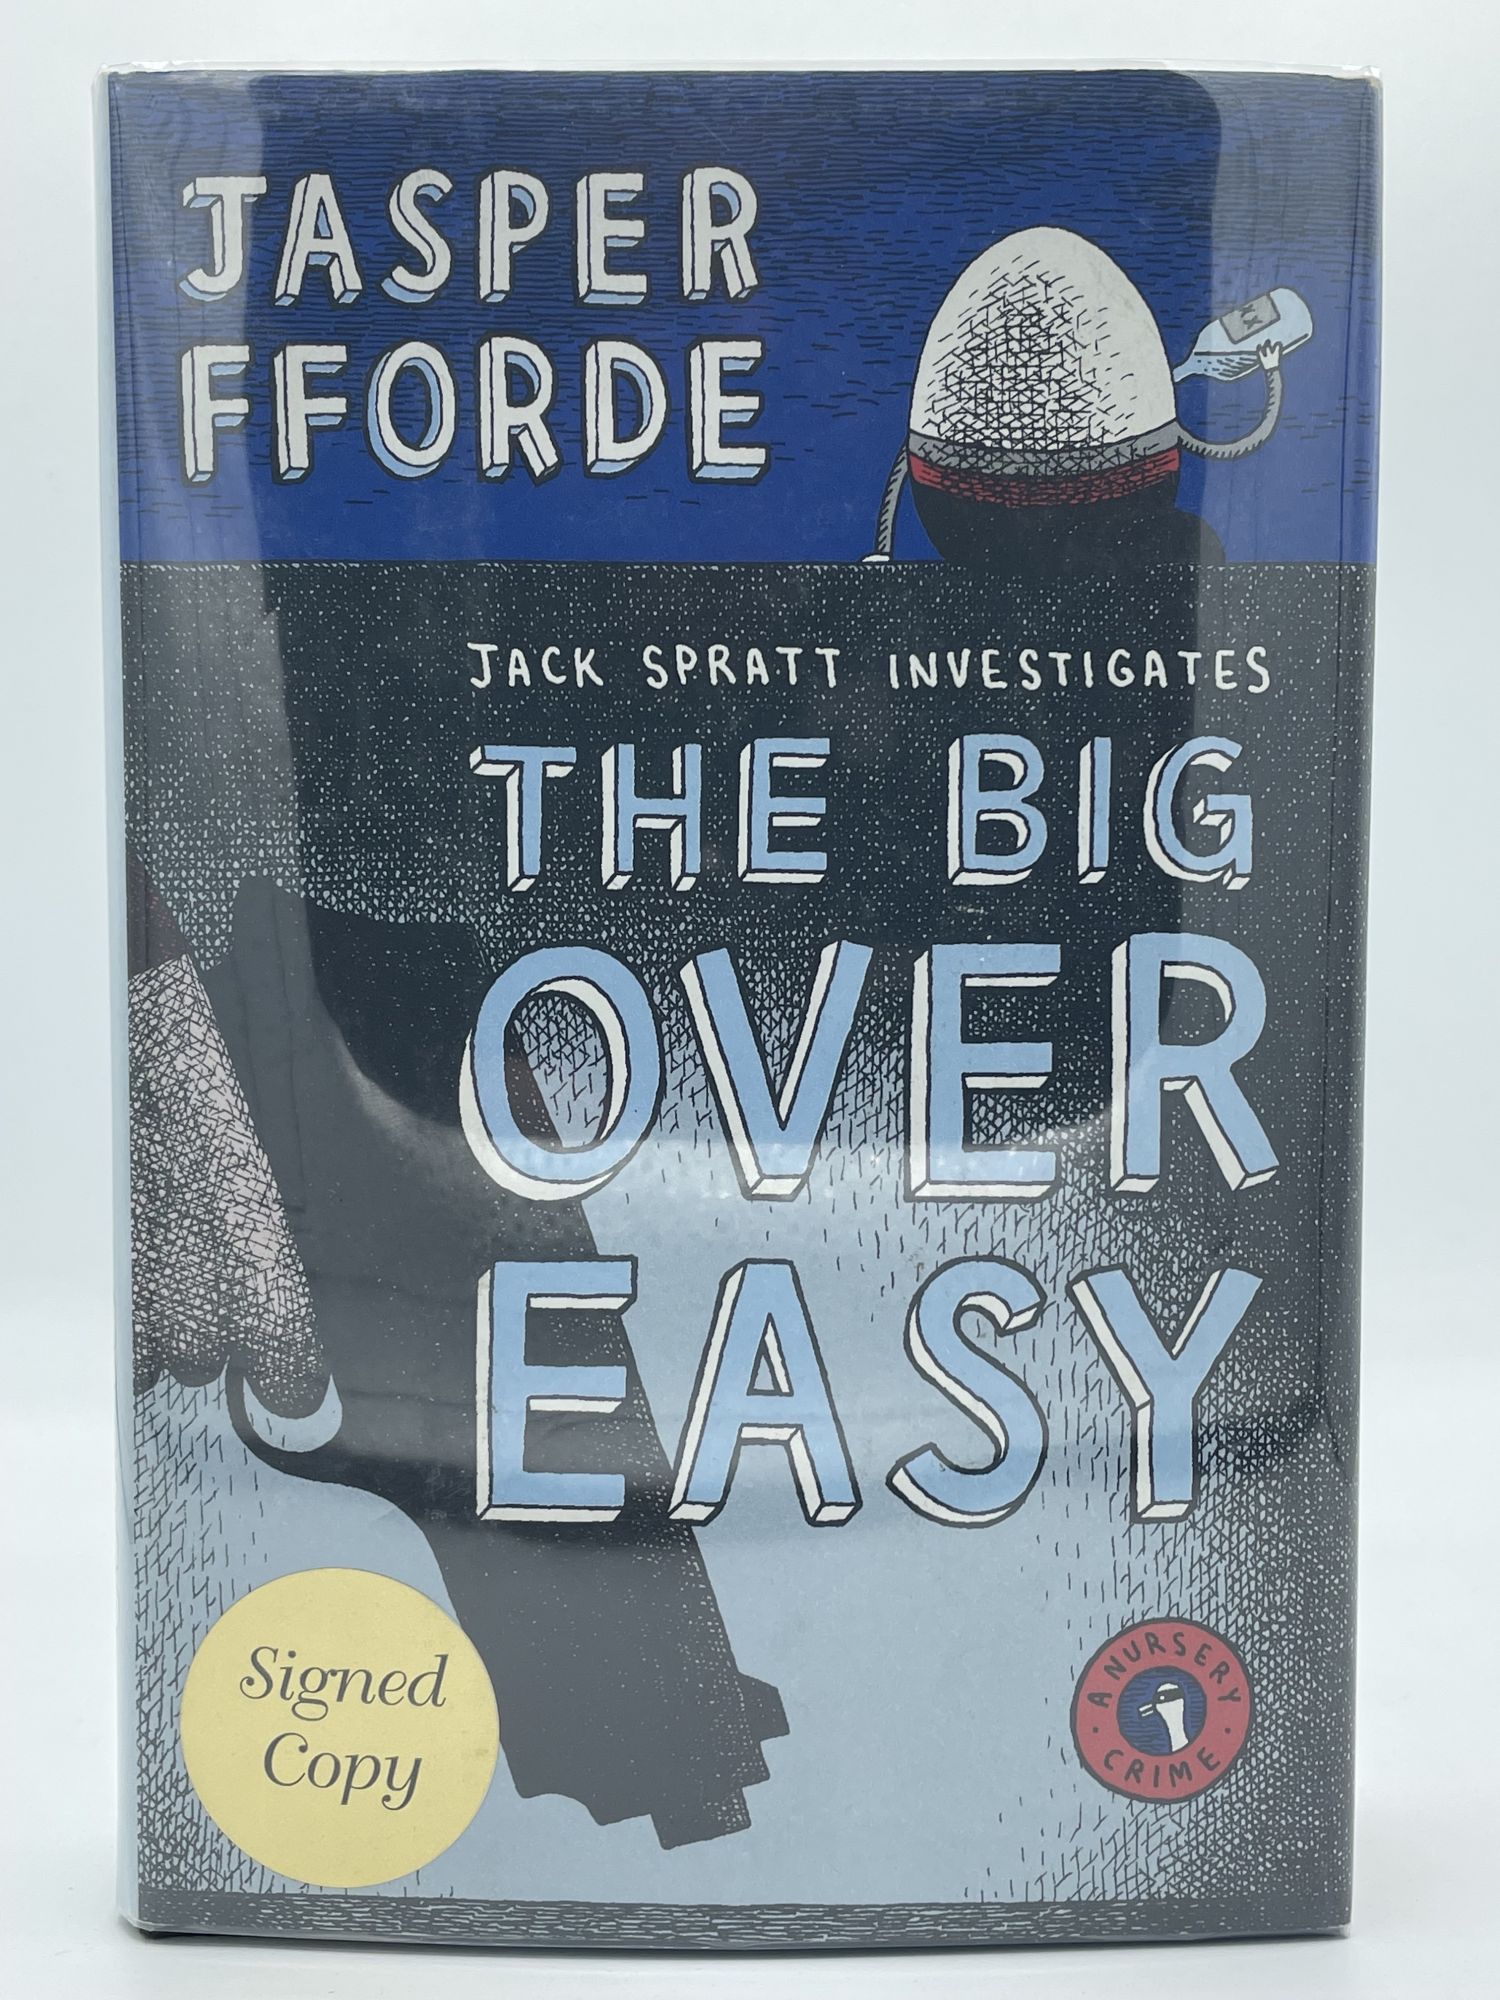 The Big Over Easy; A Nursery Crime FFORDE, Jasper [SIGNED] [Fine] [Hardcover] 8vo. Boards. Dust jacket. 383 pp. Signed on tipped in page.  Signed copy  sticker on front cover. A fine copy. This is a signed first printing of the first volume of Fforde's Jack Spratt series.